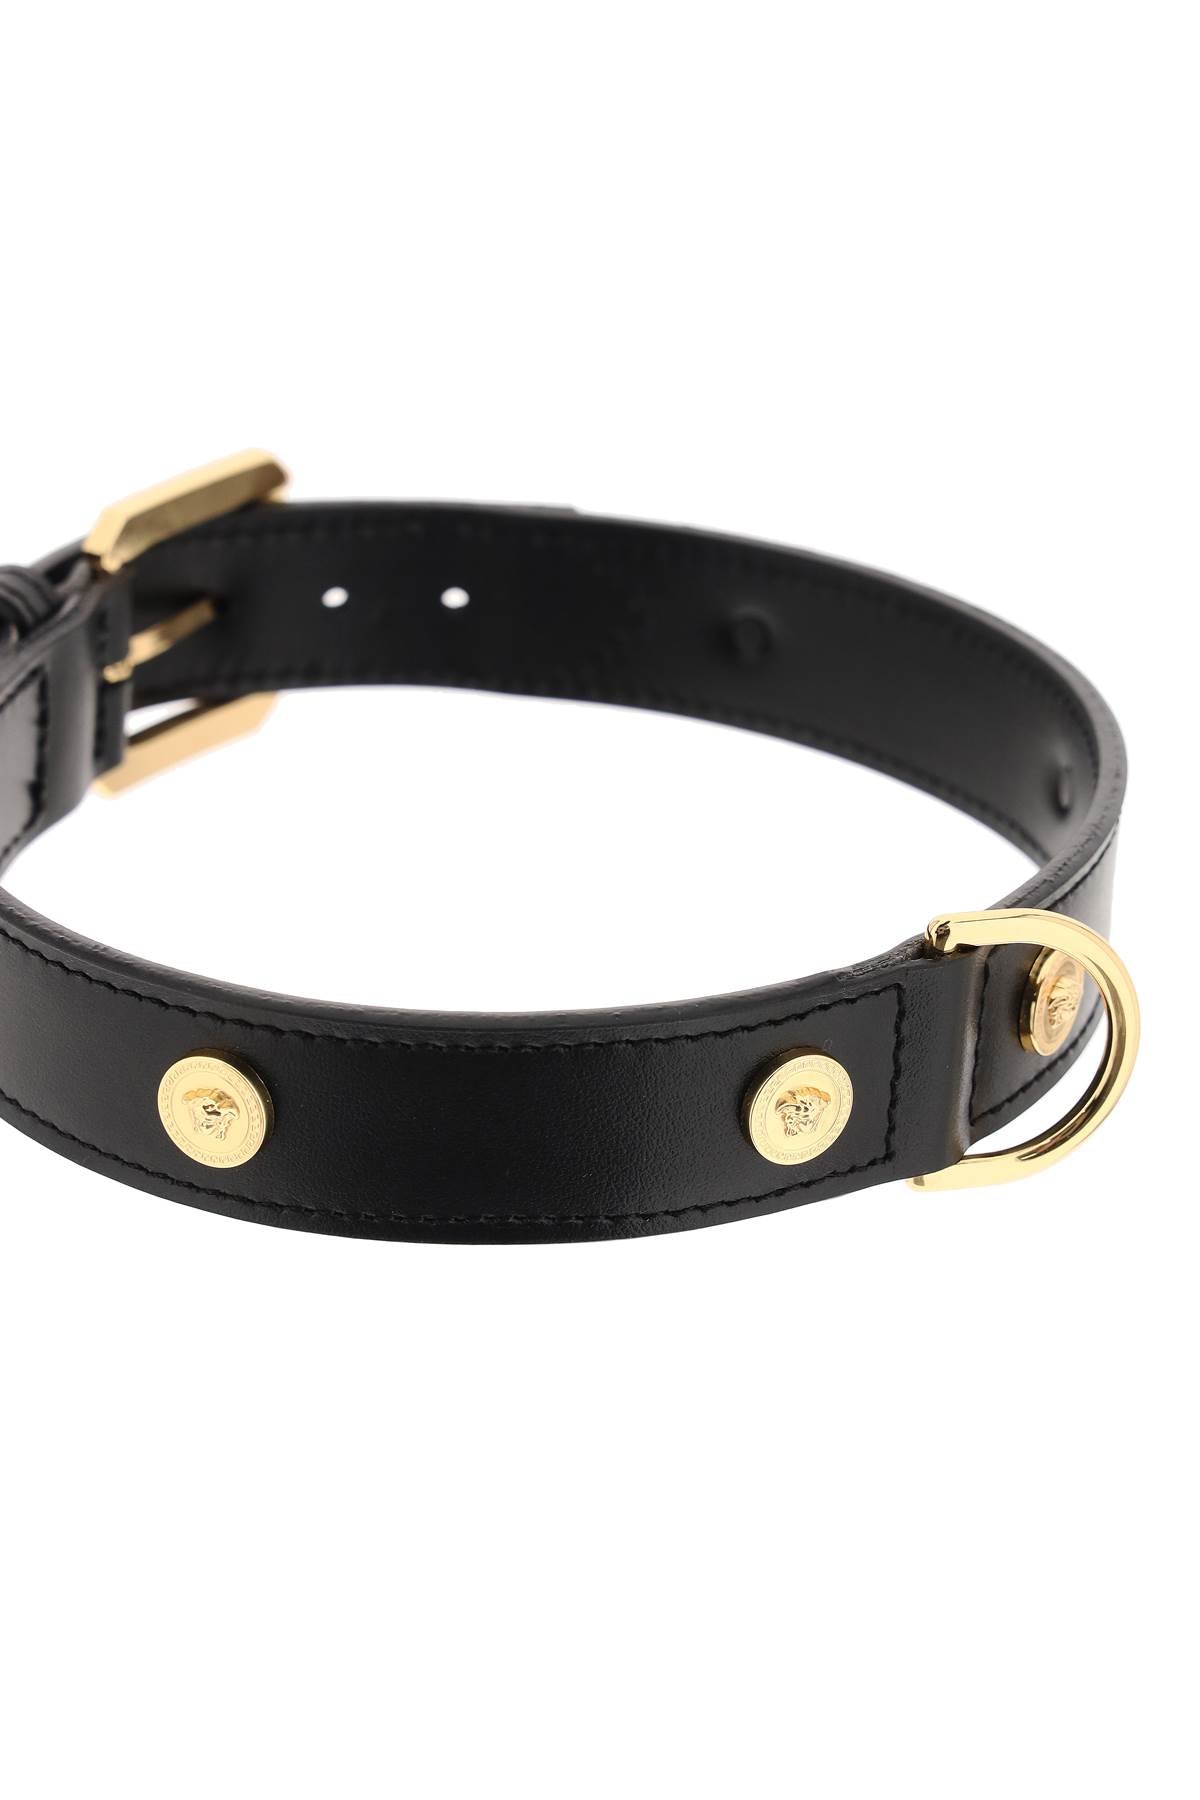 Versace leather collar with medusa studs - large-2